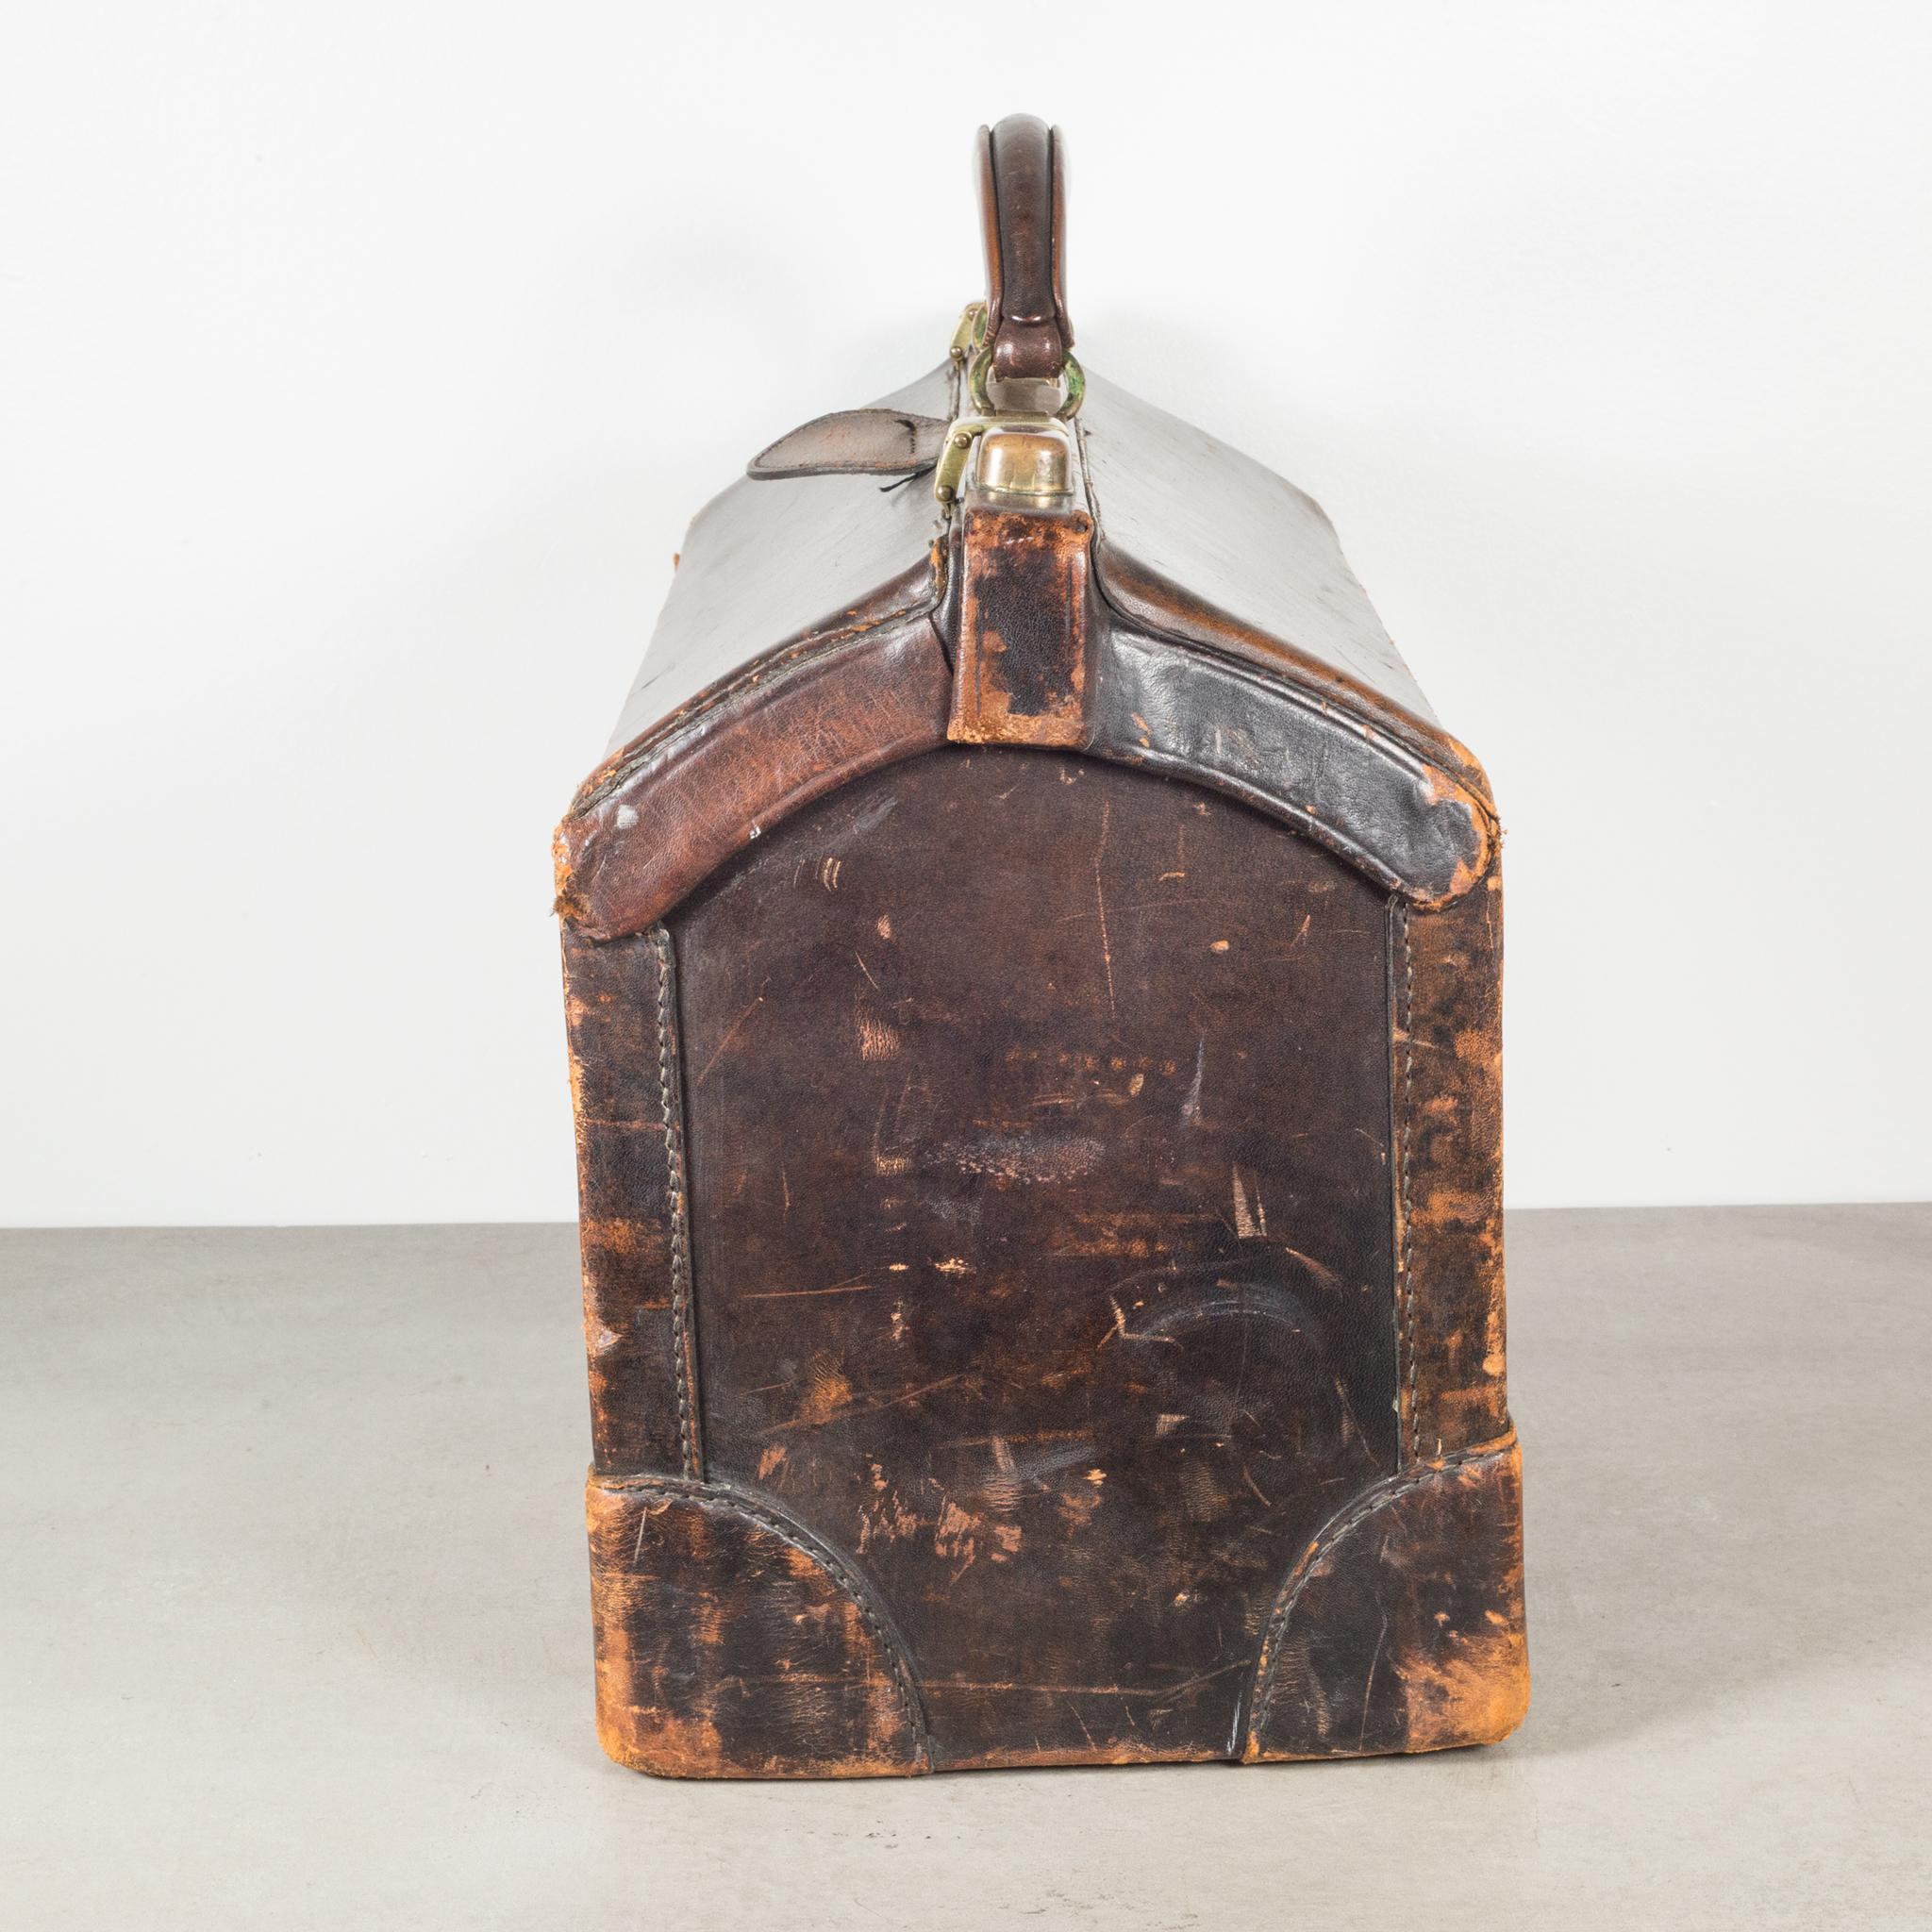 Plated Antique Leather Doctor's Examination House Call Bag, c.1930-1940